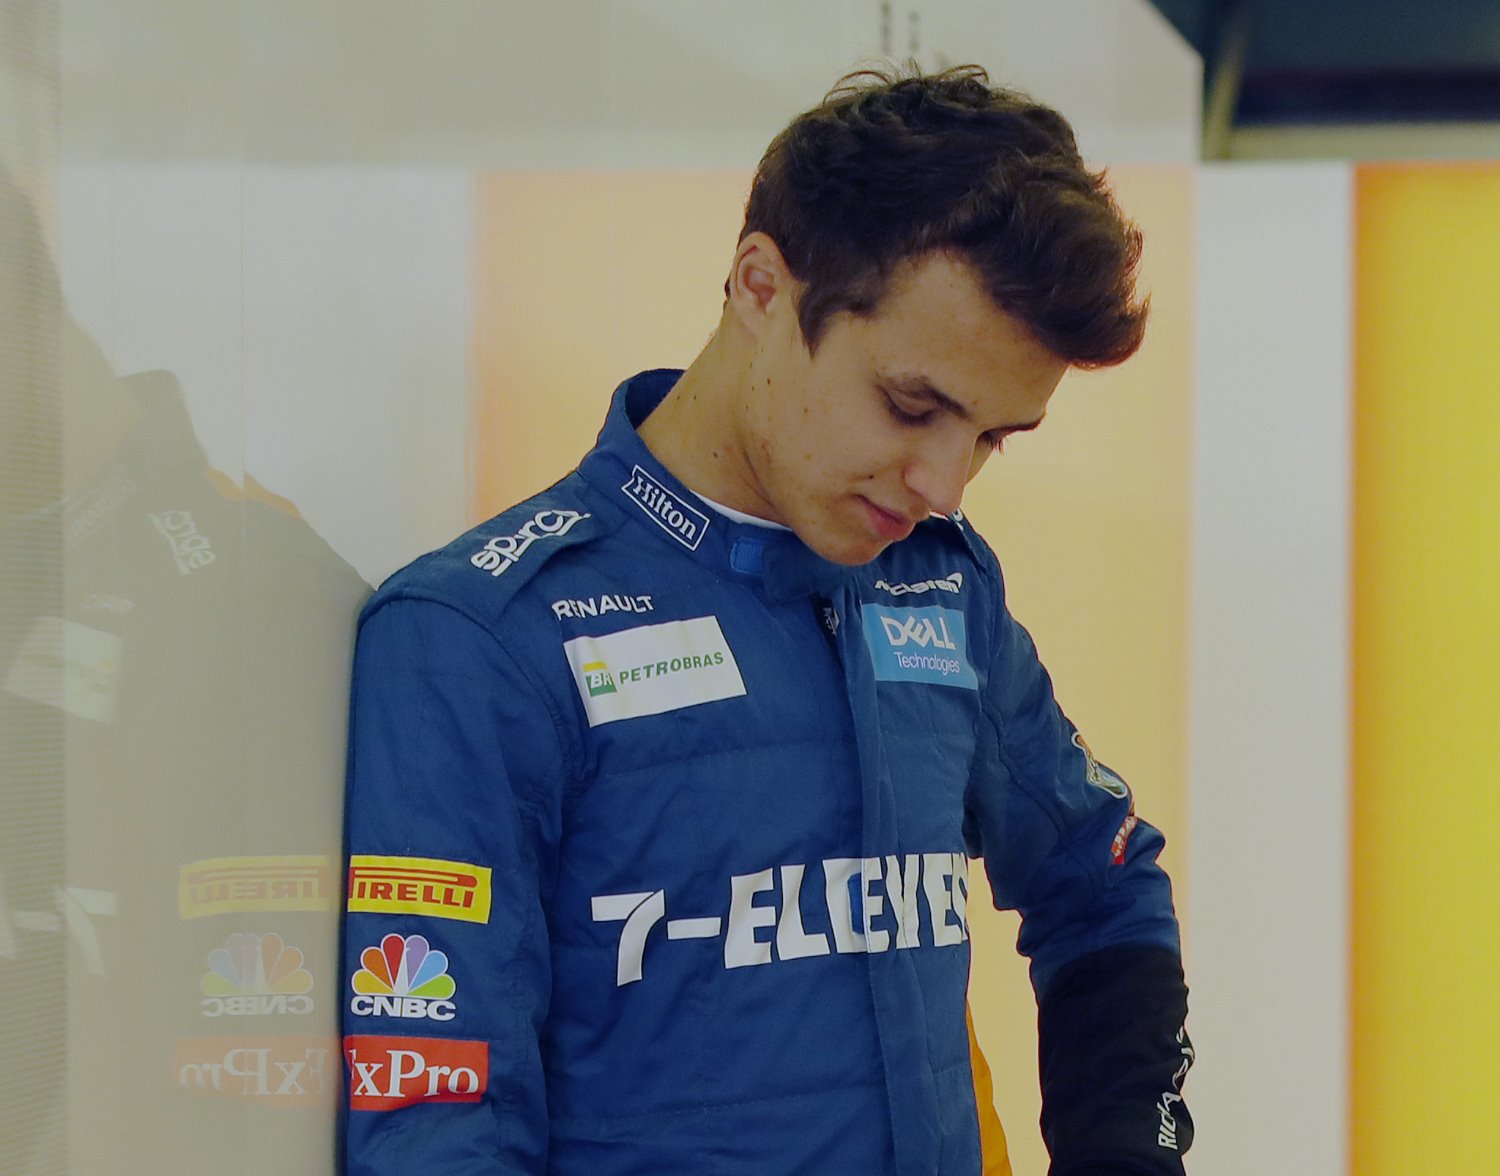 Norris, destroyed by George Russel in F2, is the latest rich kid who looks good in a sport where driver talent is only 1% of the performance of the car